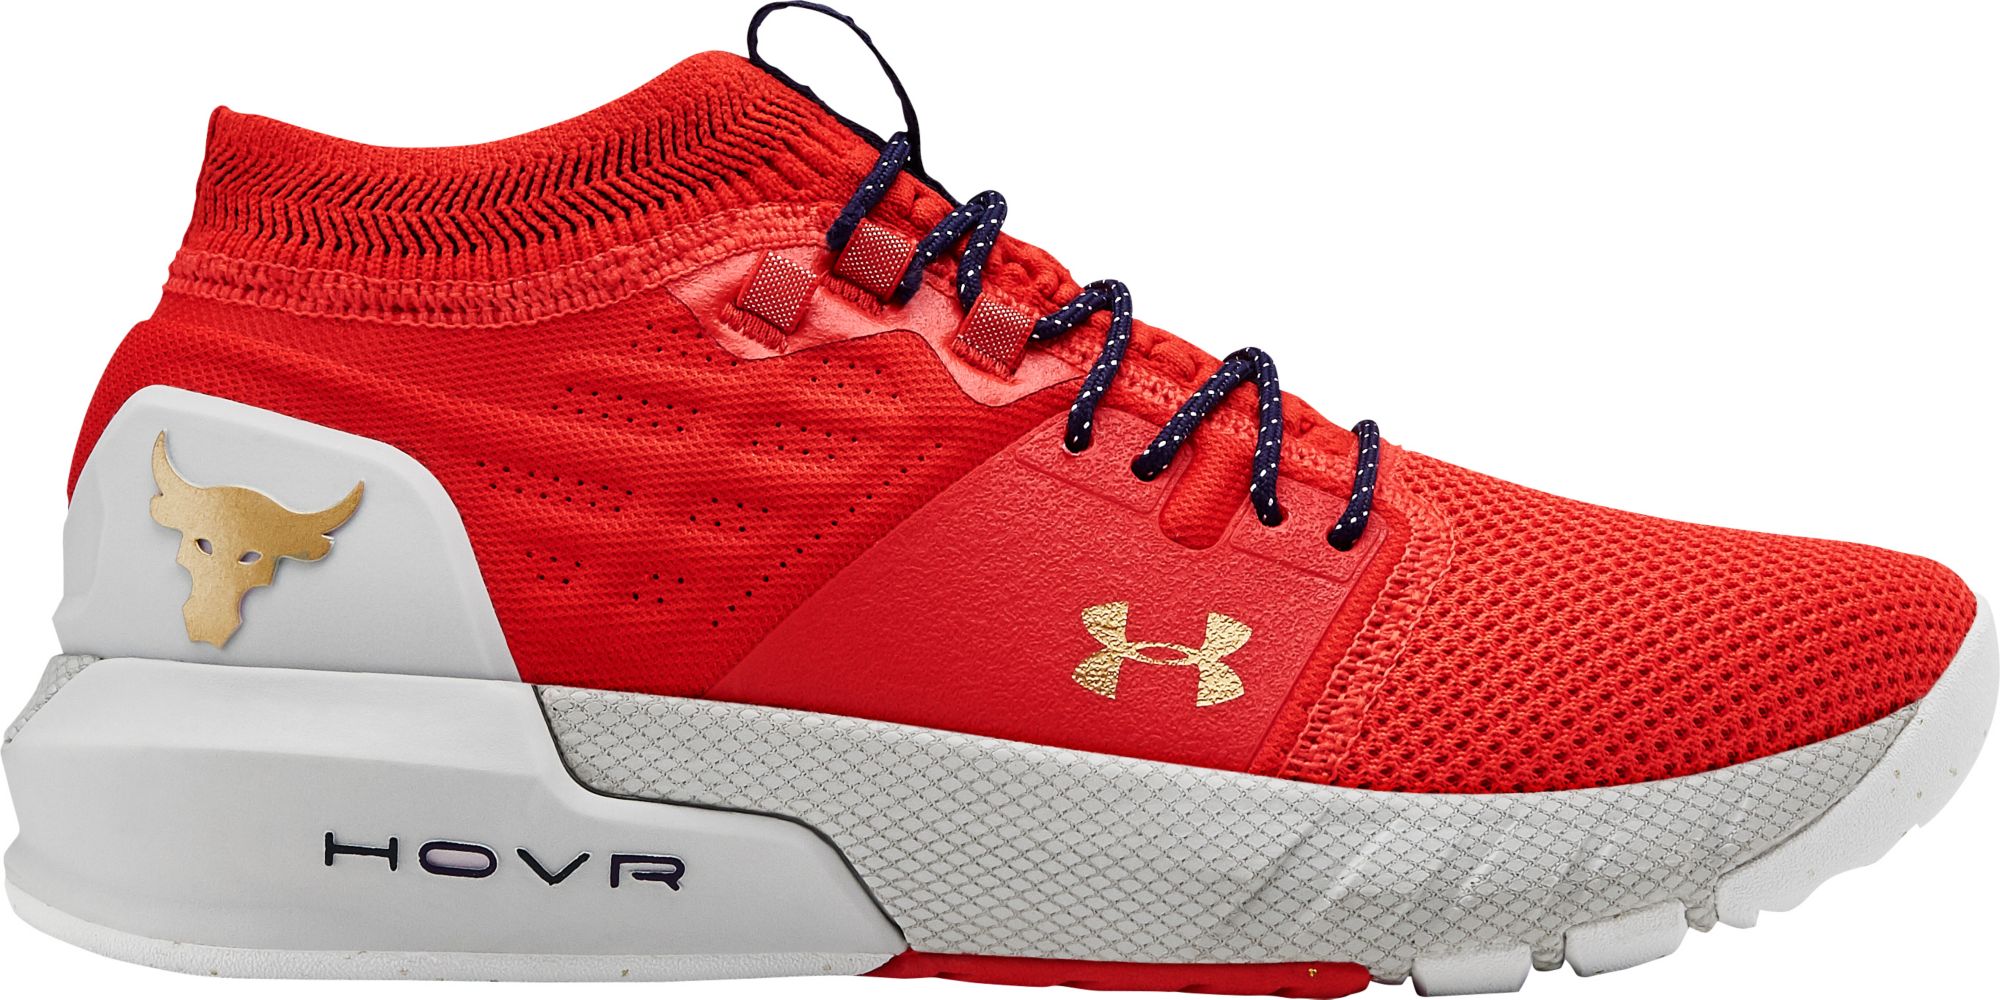 Under Armour Project Rock 2 Review 